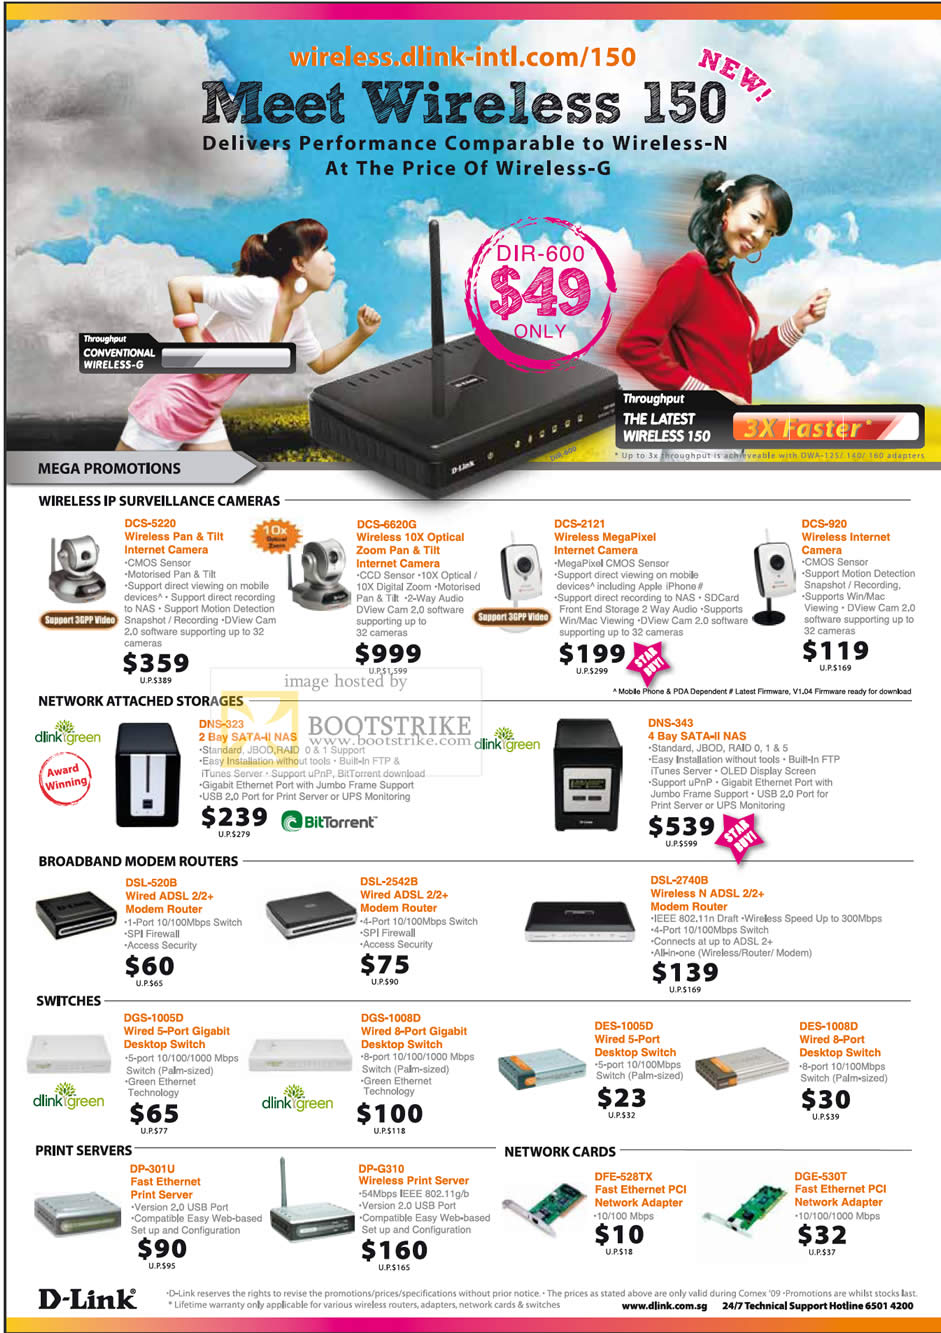 Comex 2009 price list image brochure of D-Link Wireless IP Surveillance Camera NAS Modem Routers Switches Print Servers